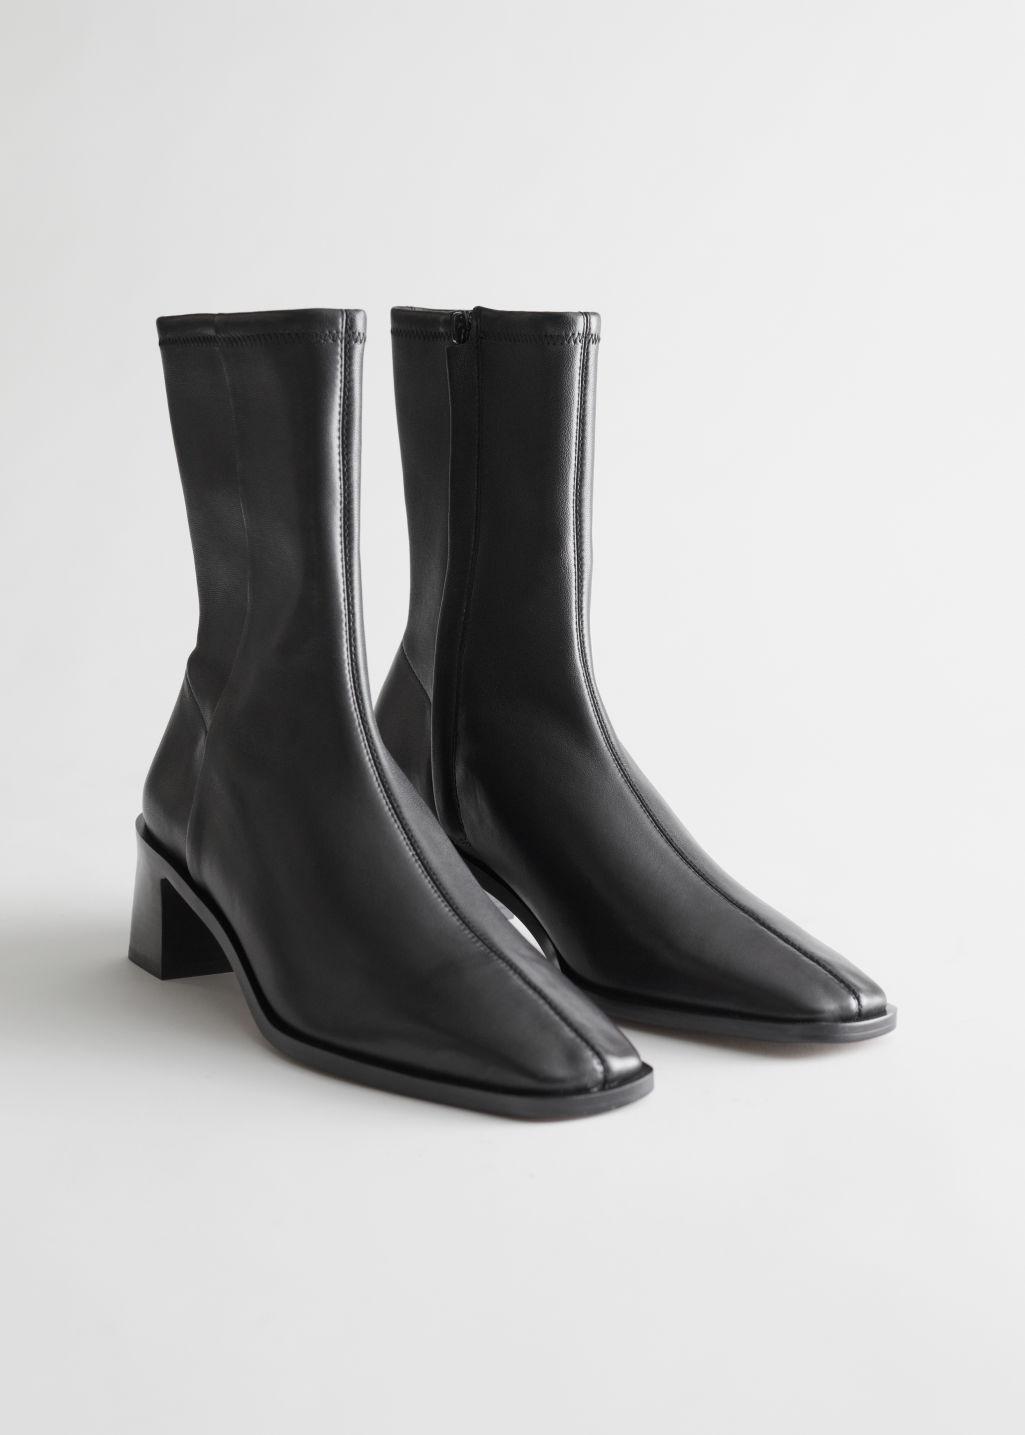 & Other Stories Squared Toe Leather Sock Boots in Black - Lyst